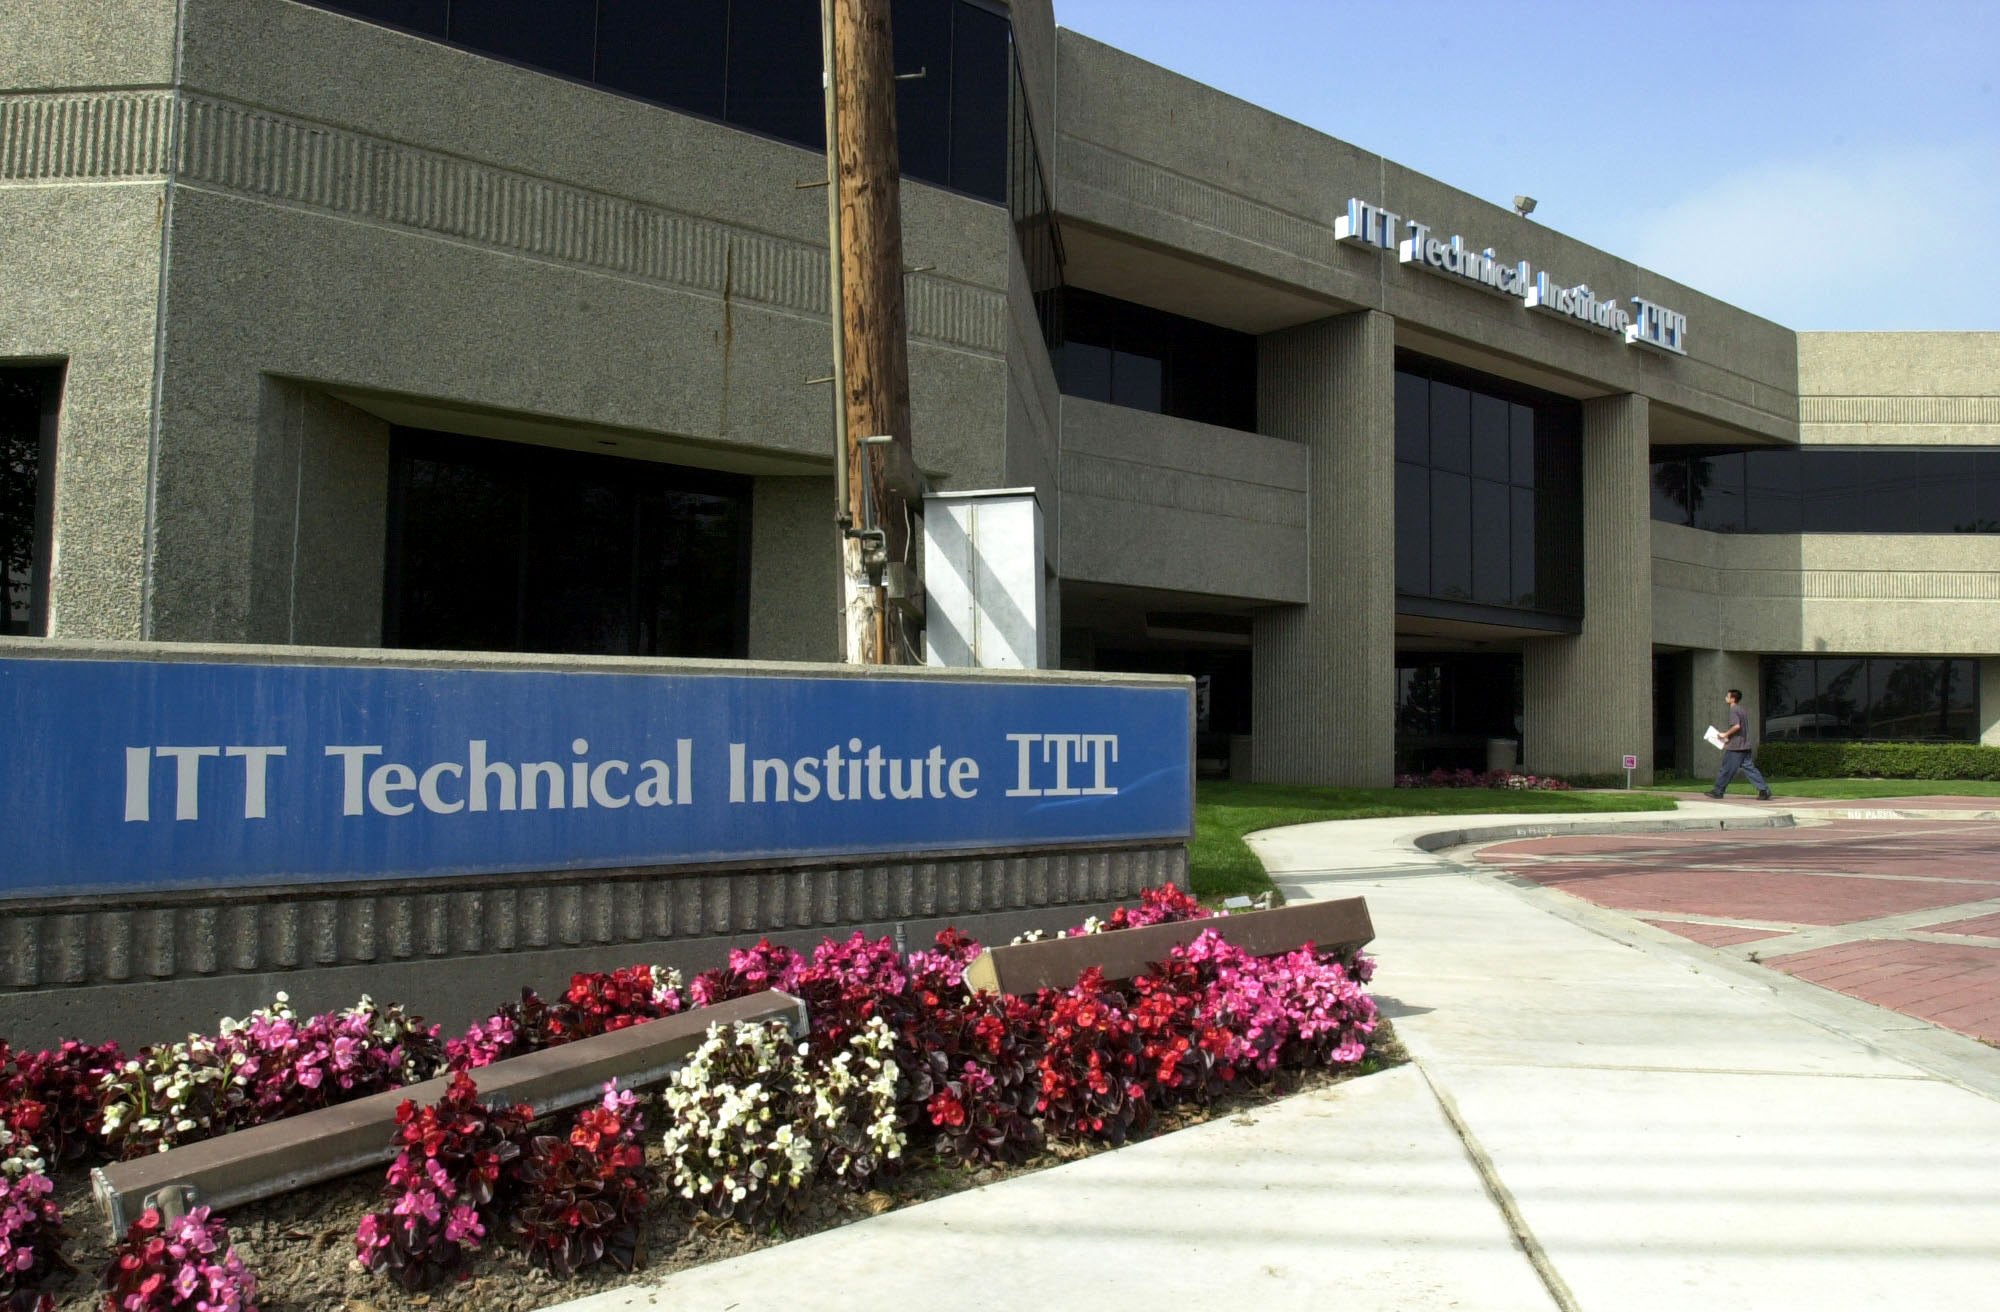 The campus of ITT Technical Institute in Anaheim, Calif., on March 15, 2004. (Susan Goldman—Bloomberg/Getty Images)